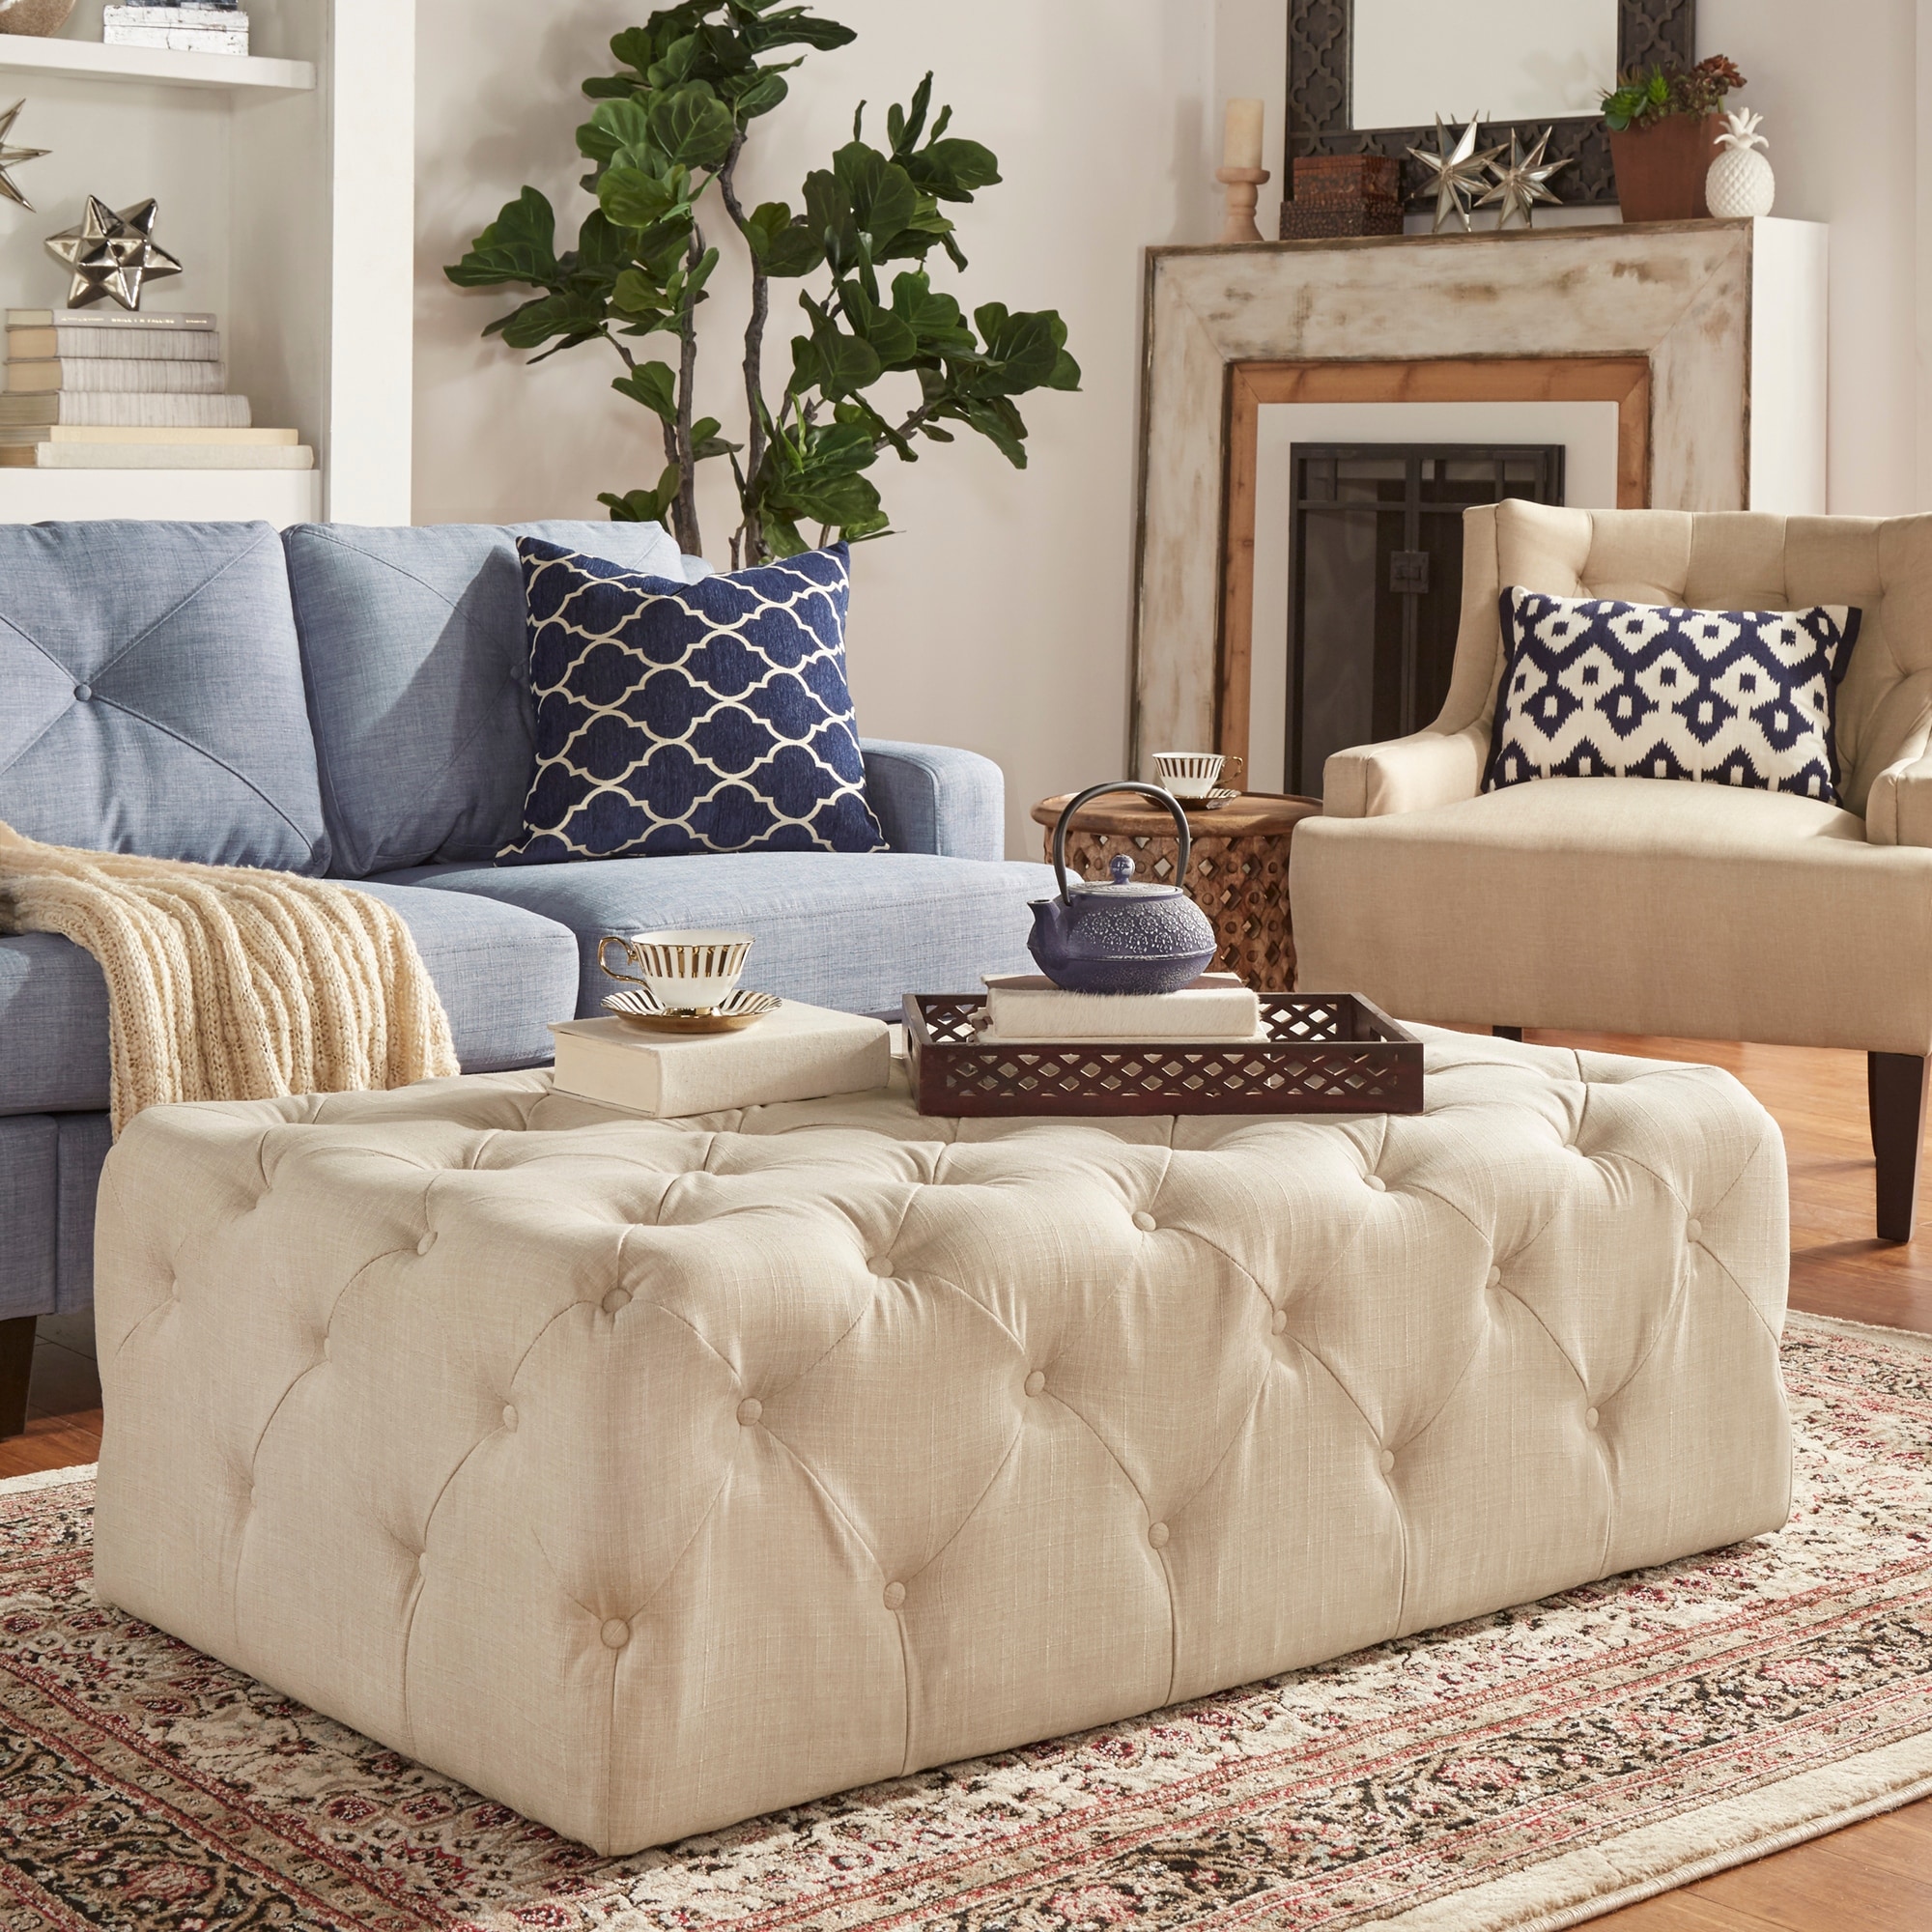 Knightsbridge Tufted Oversized Chaise Lounge by iNSPIRE Q Artisan